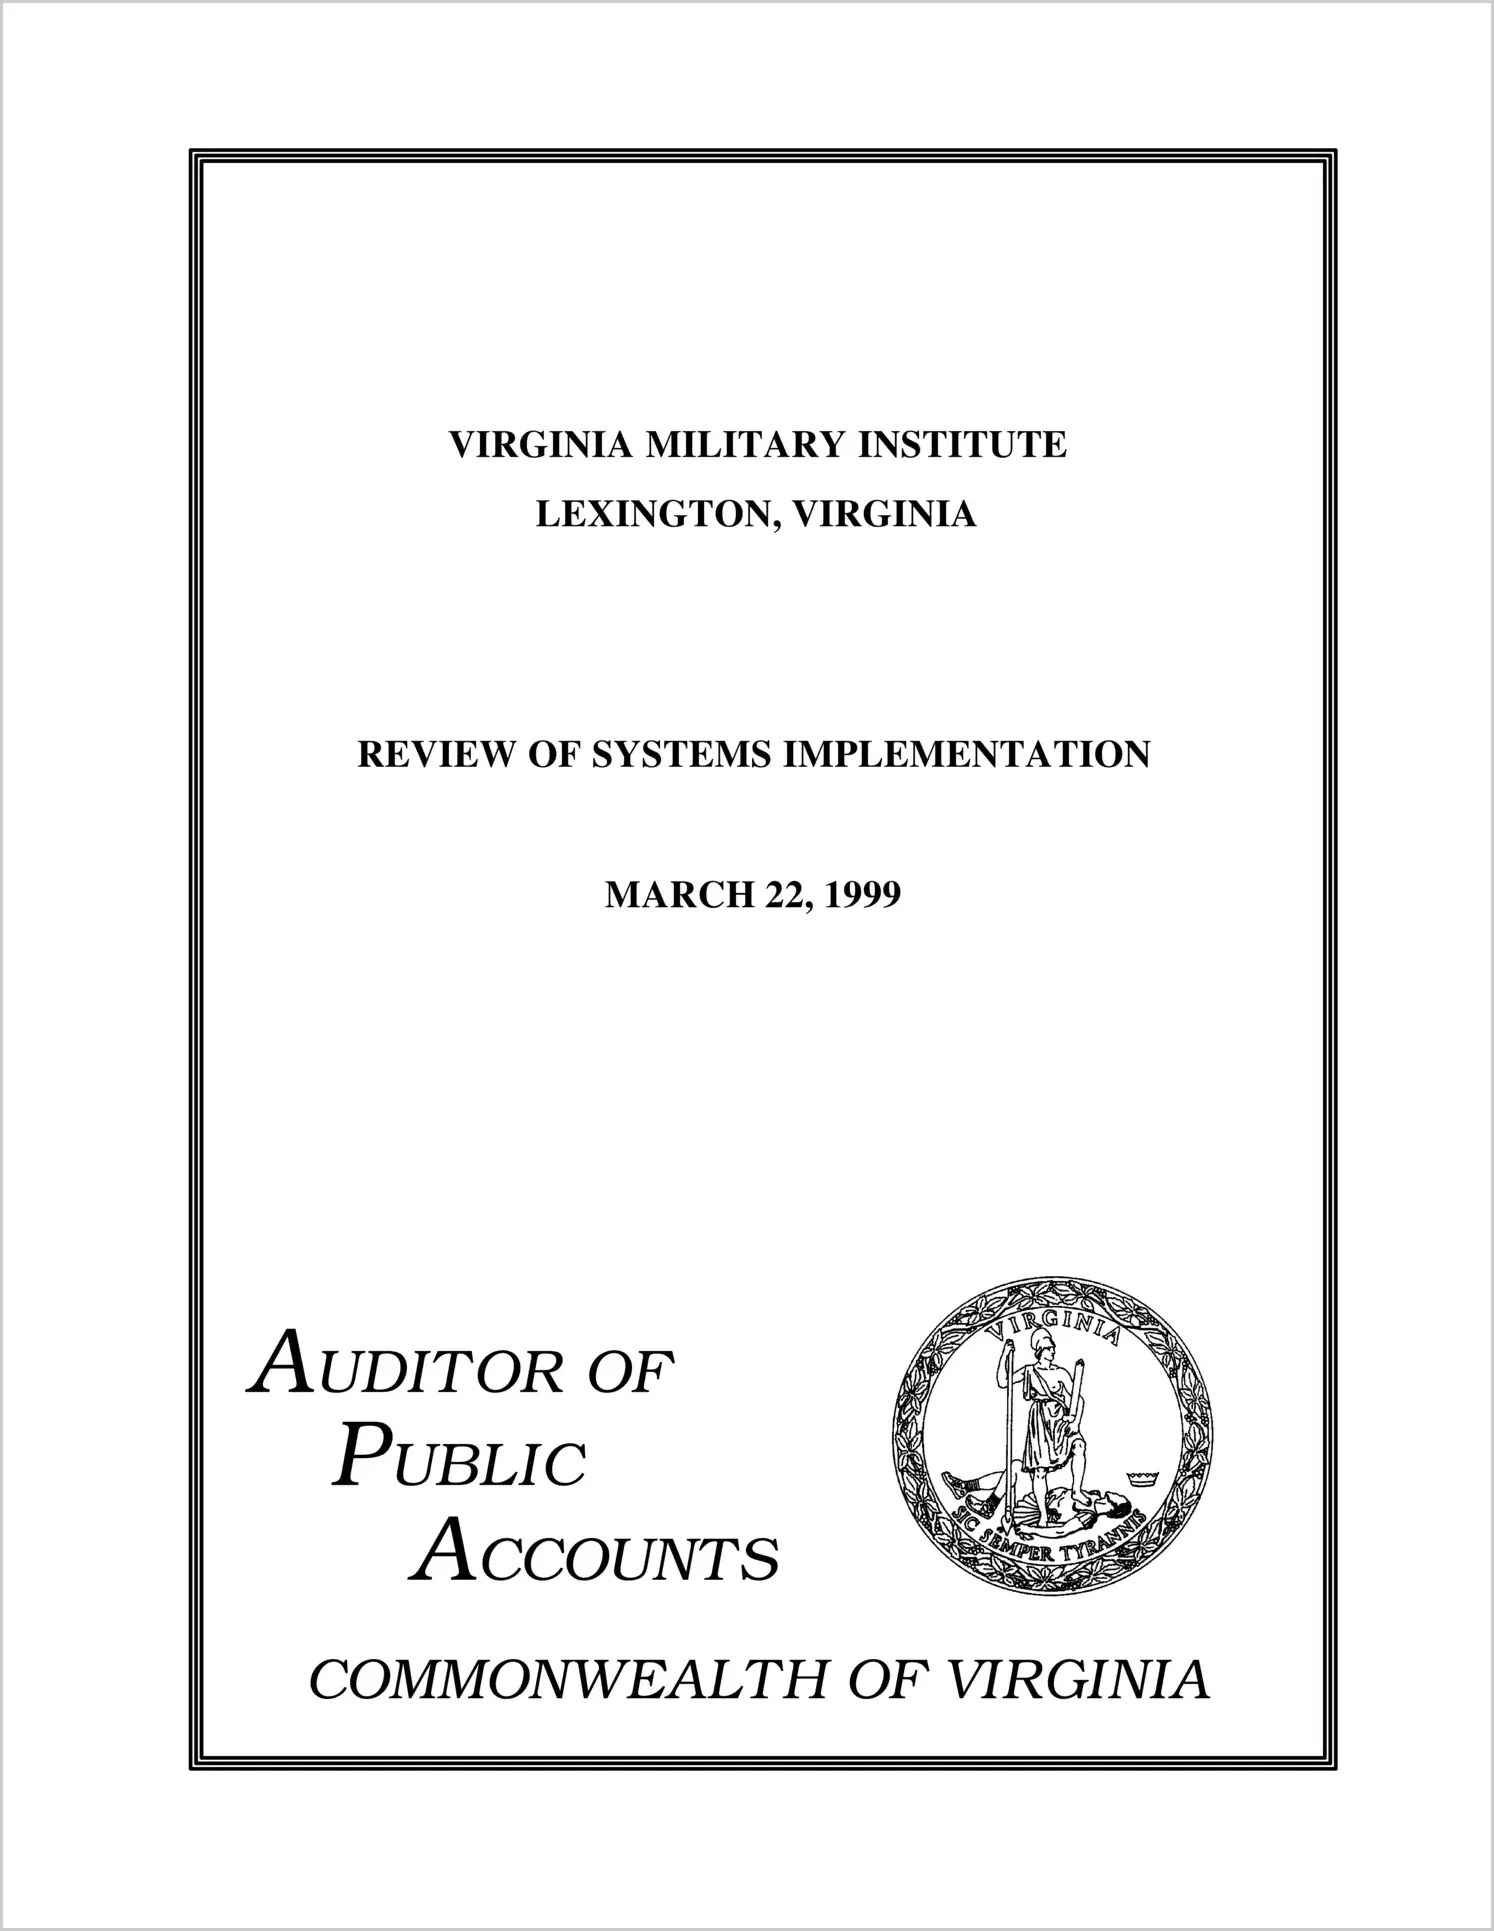 Special ReportVirginia Military Institute Review of Systems Implementation(Report Date: 3/22/1999)